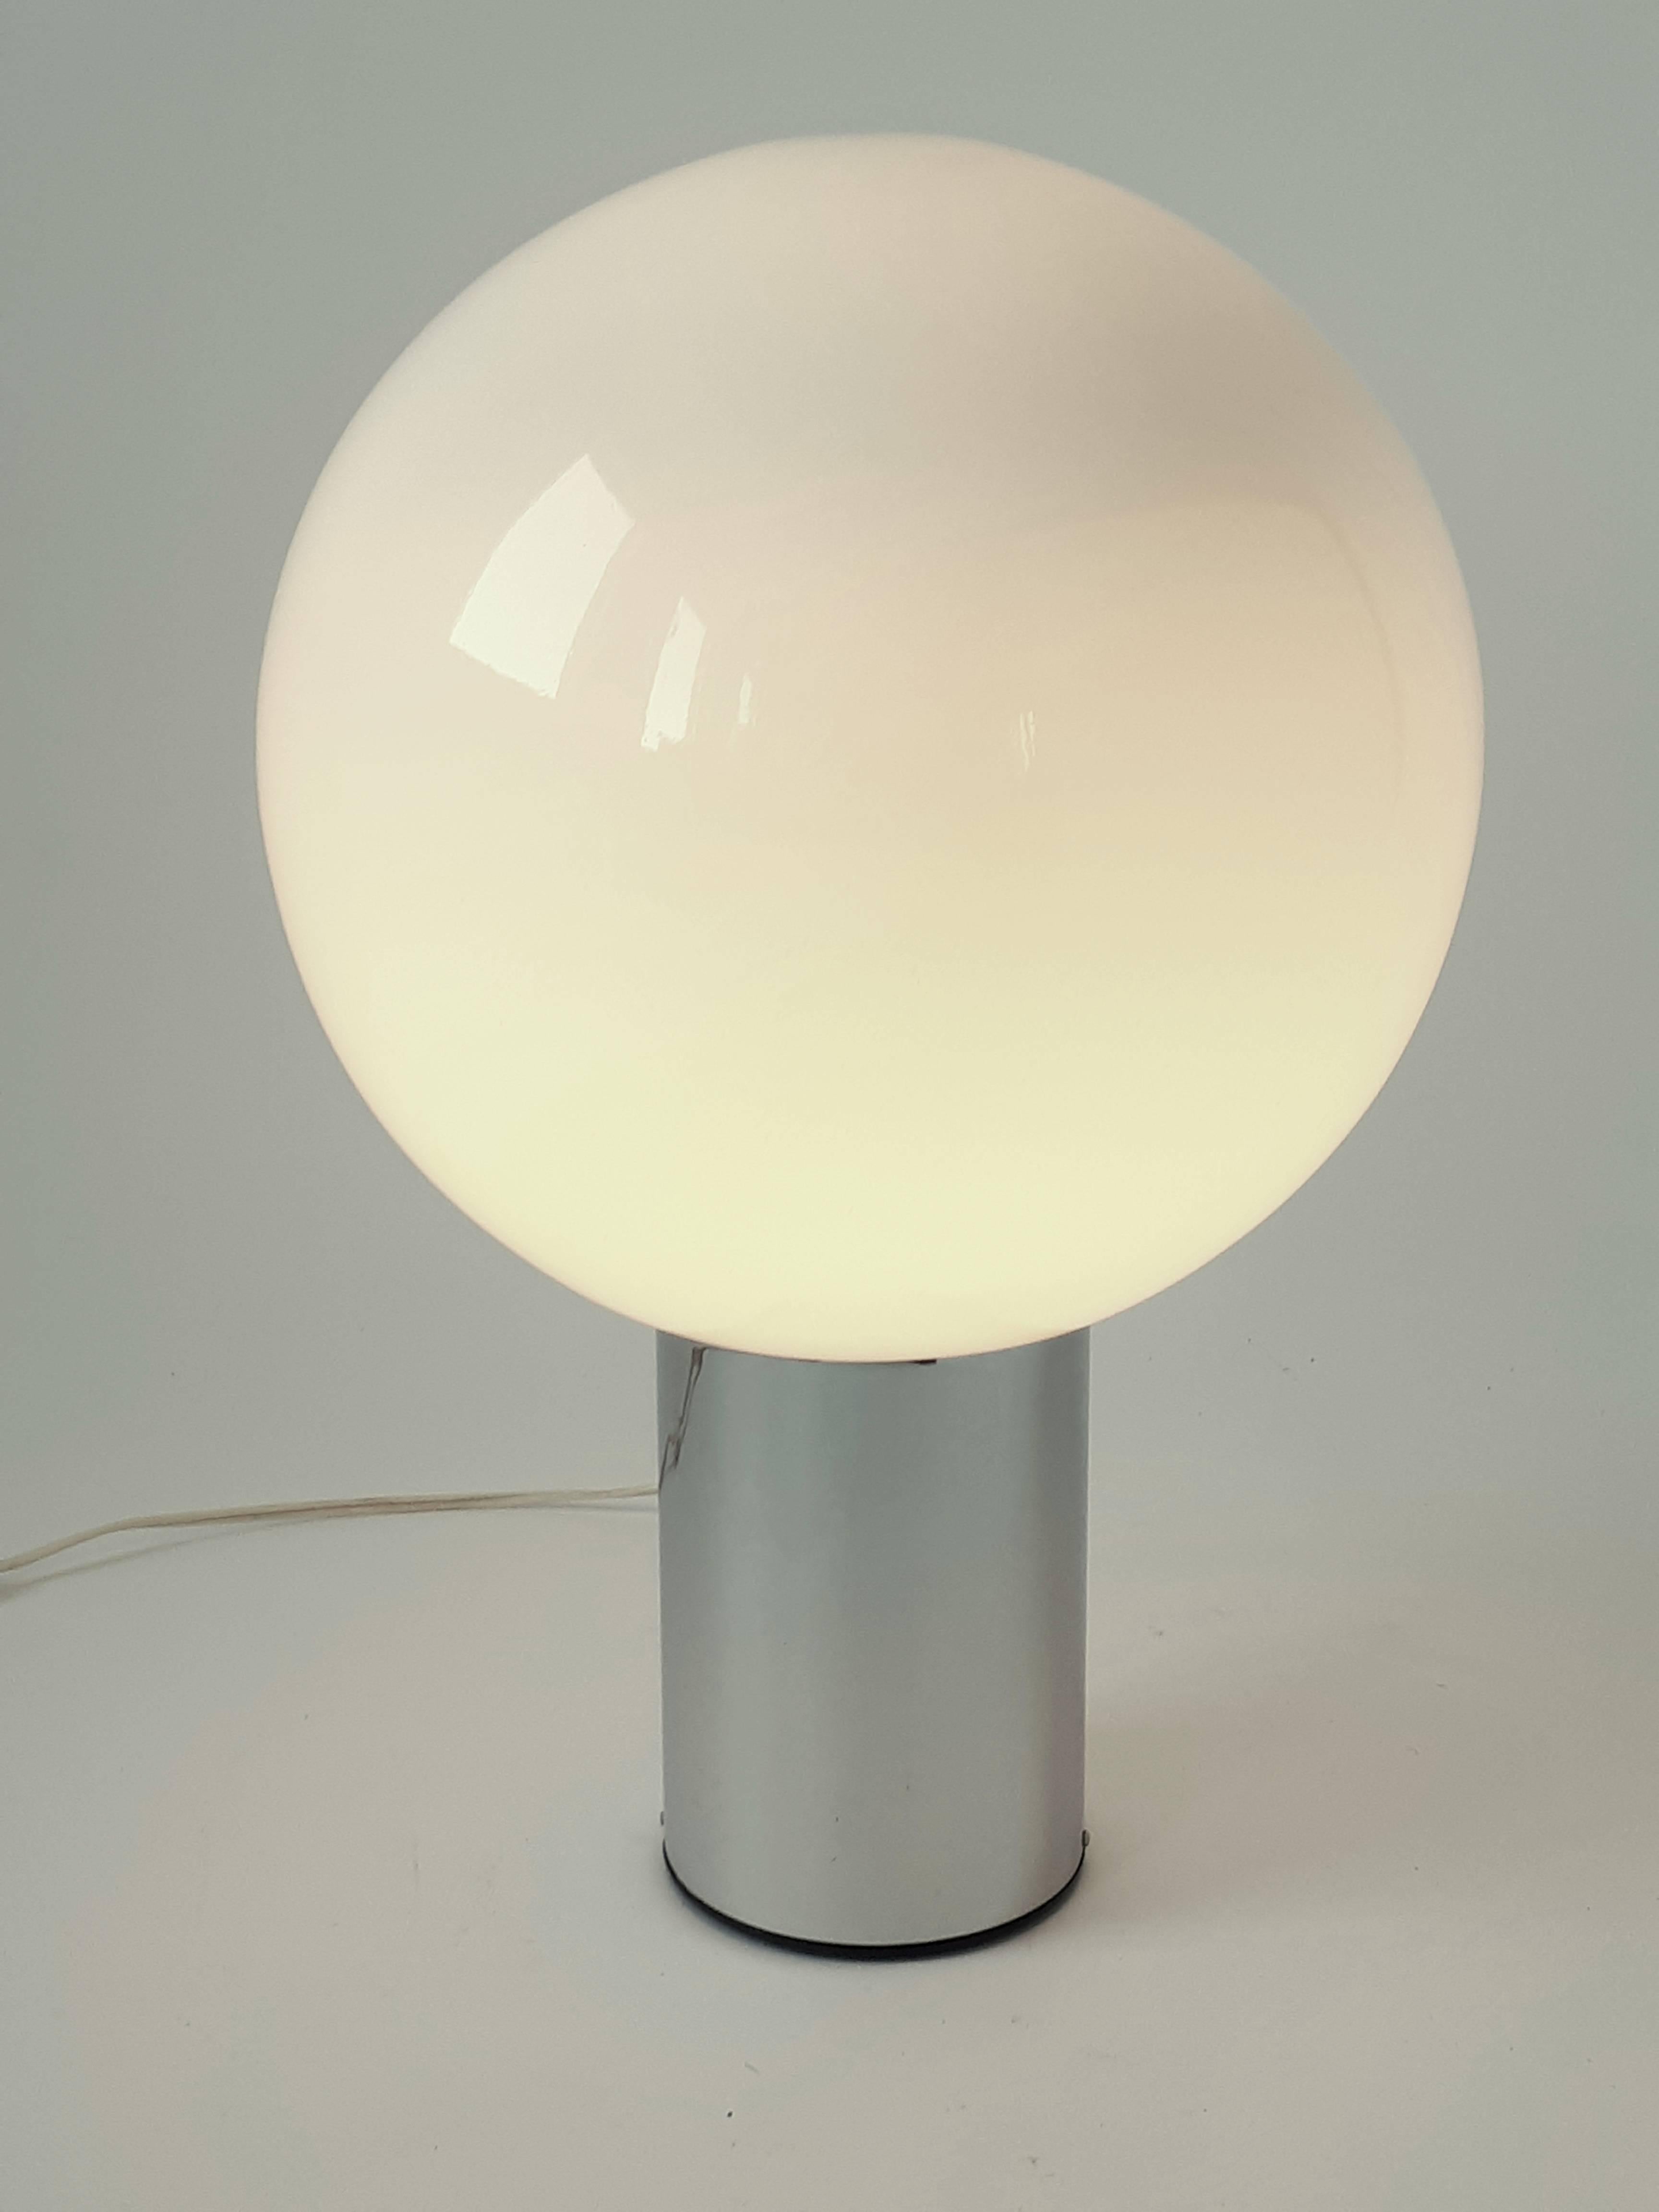 Large minimalist modern table lamp .

Thick opale glass eyeball sitting on a chrome base . 

Measures 11 inches wide .  

Bold with a presence . 

Switch on original cord . 

E26 regular size socket rated at 60 watts maximum.
  